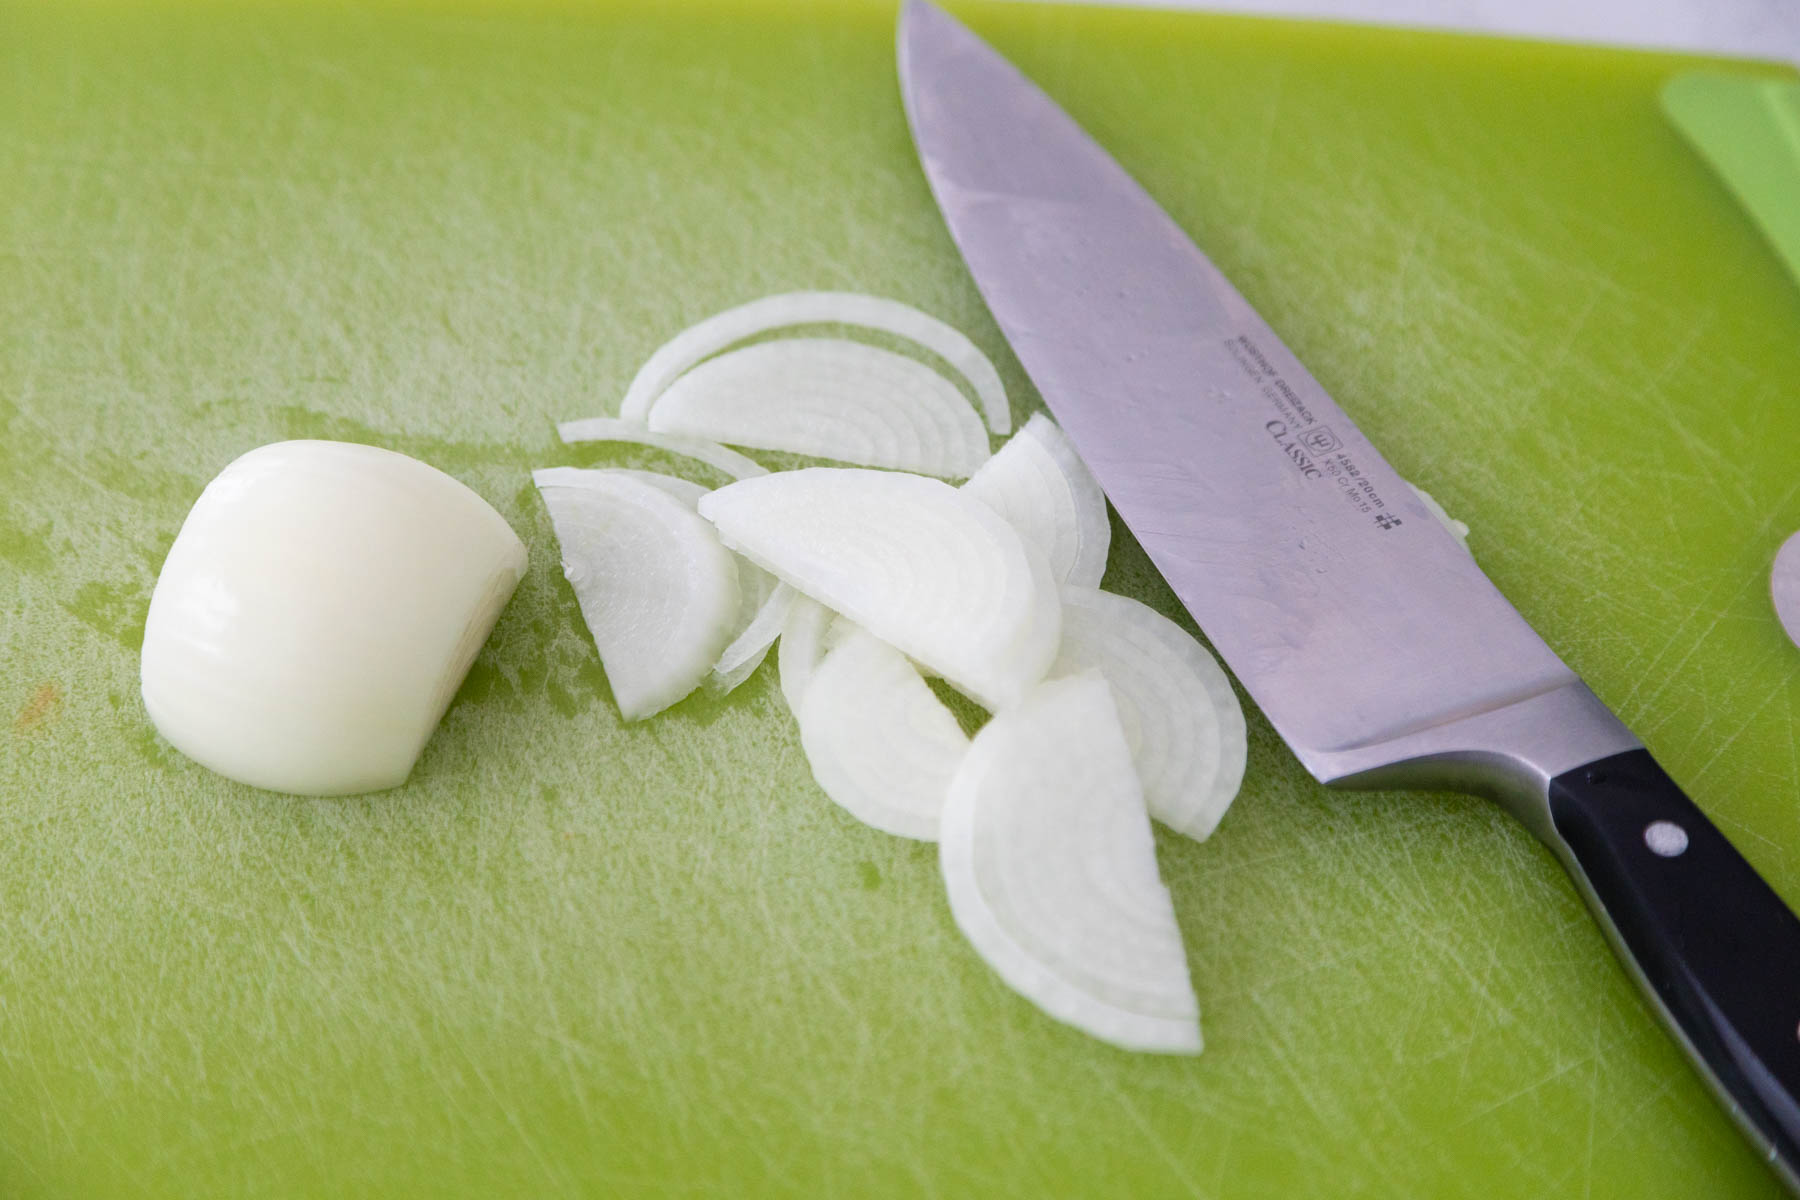 The onions are sliced thinly on a cutting board with a chef knife off to the side.